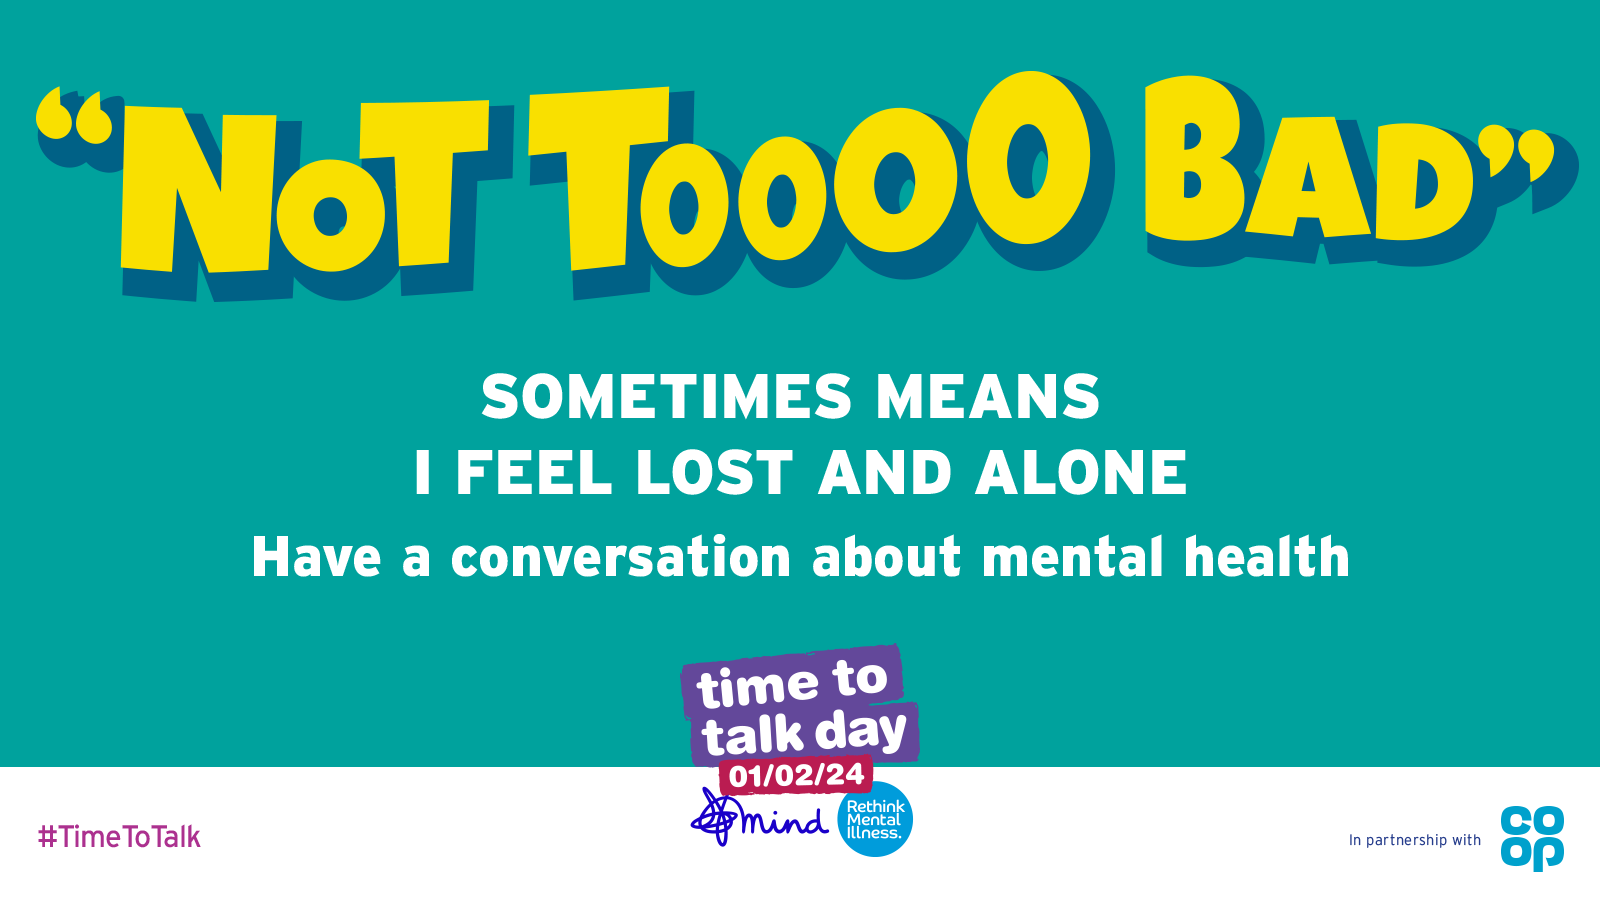 Image for Time to Talk Day. It says "Not Tooooo Bad". Sometimes means i feel lost and along. Have a conversation about Mental Health